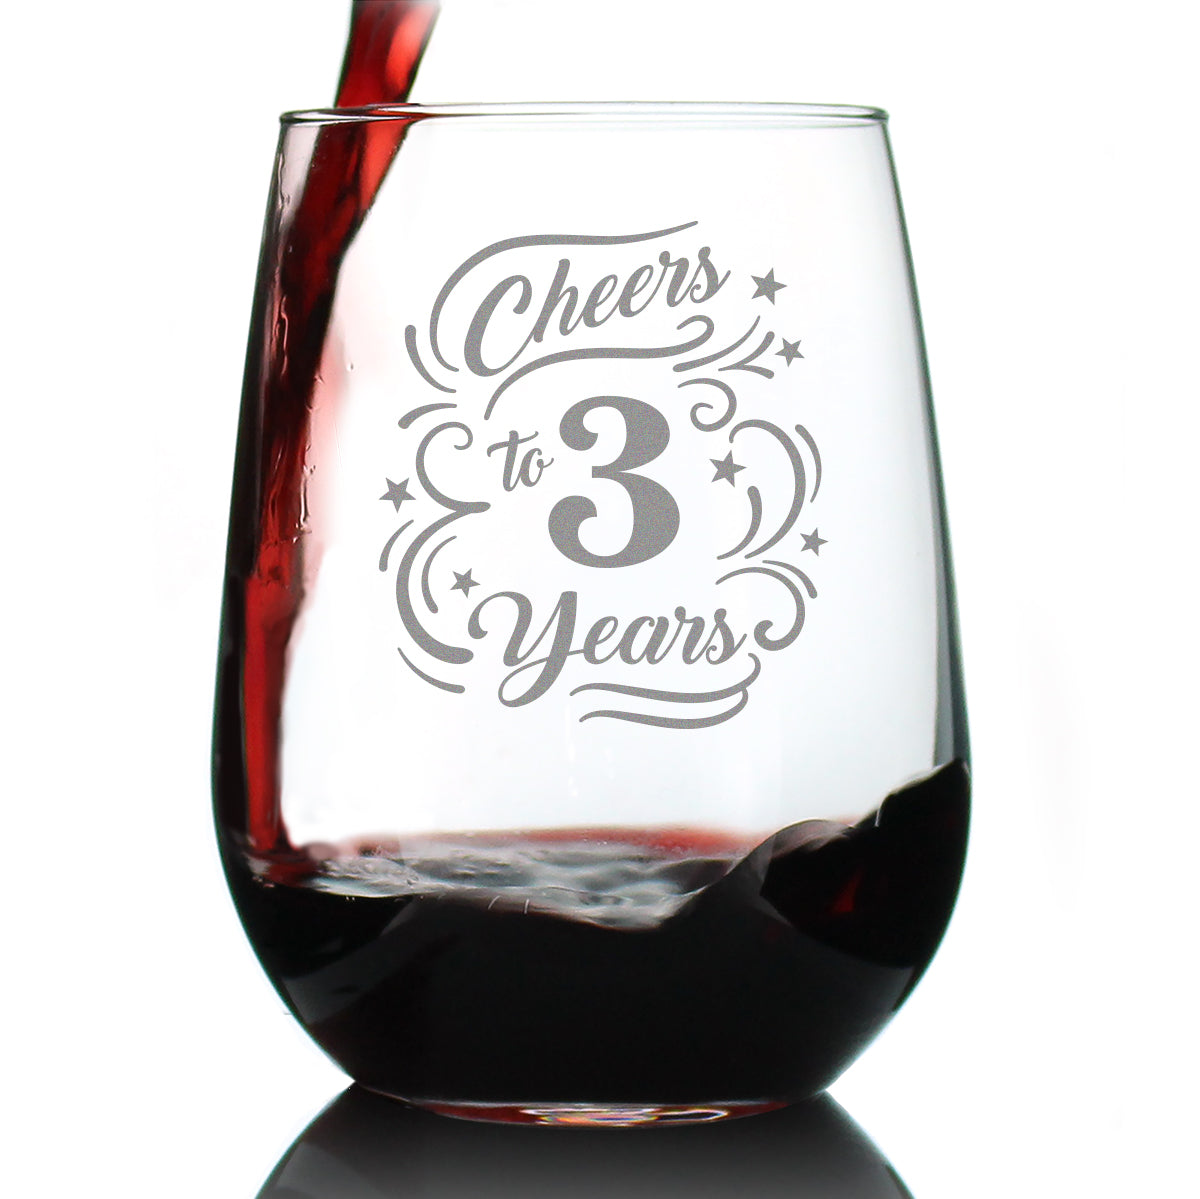 Cheers to 3 Years - Stemless Wine Glass Gifts for Women & Men - 3rd Anniversary Party Decor - Large 17 Oz Glasses